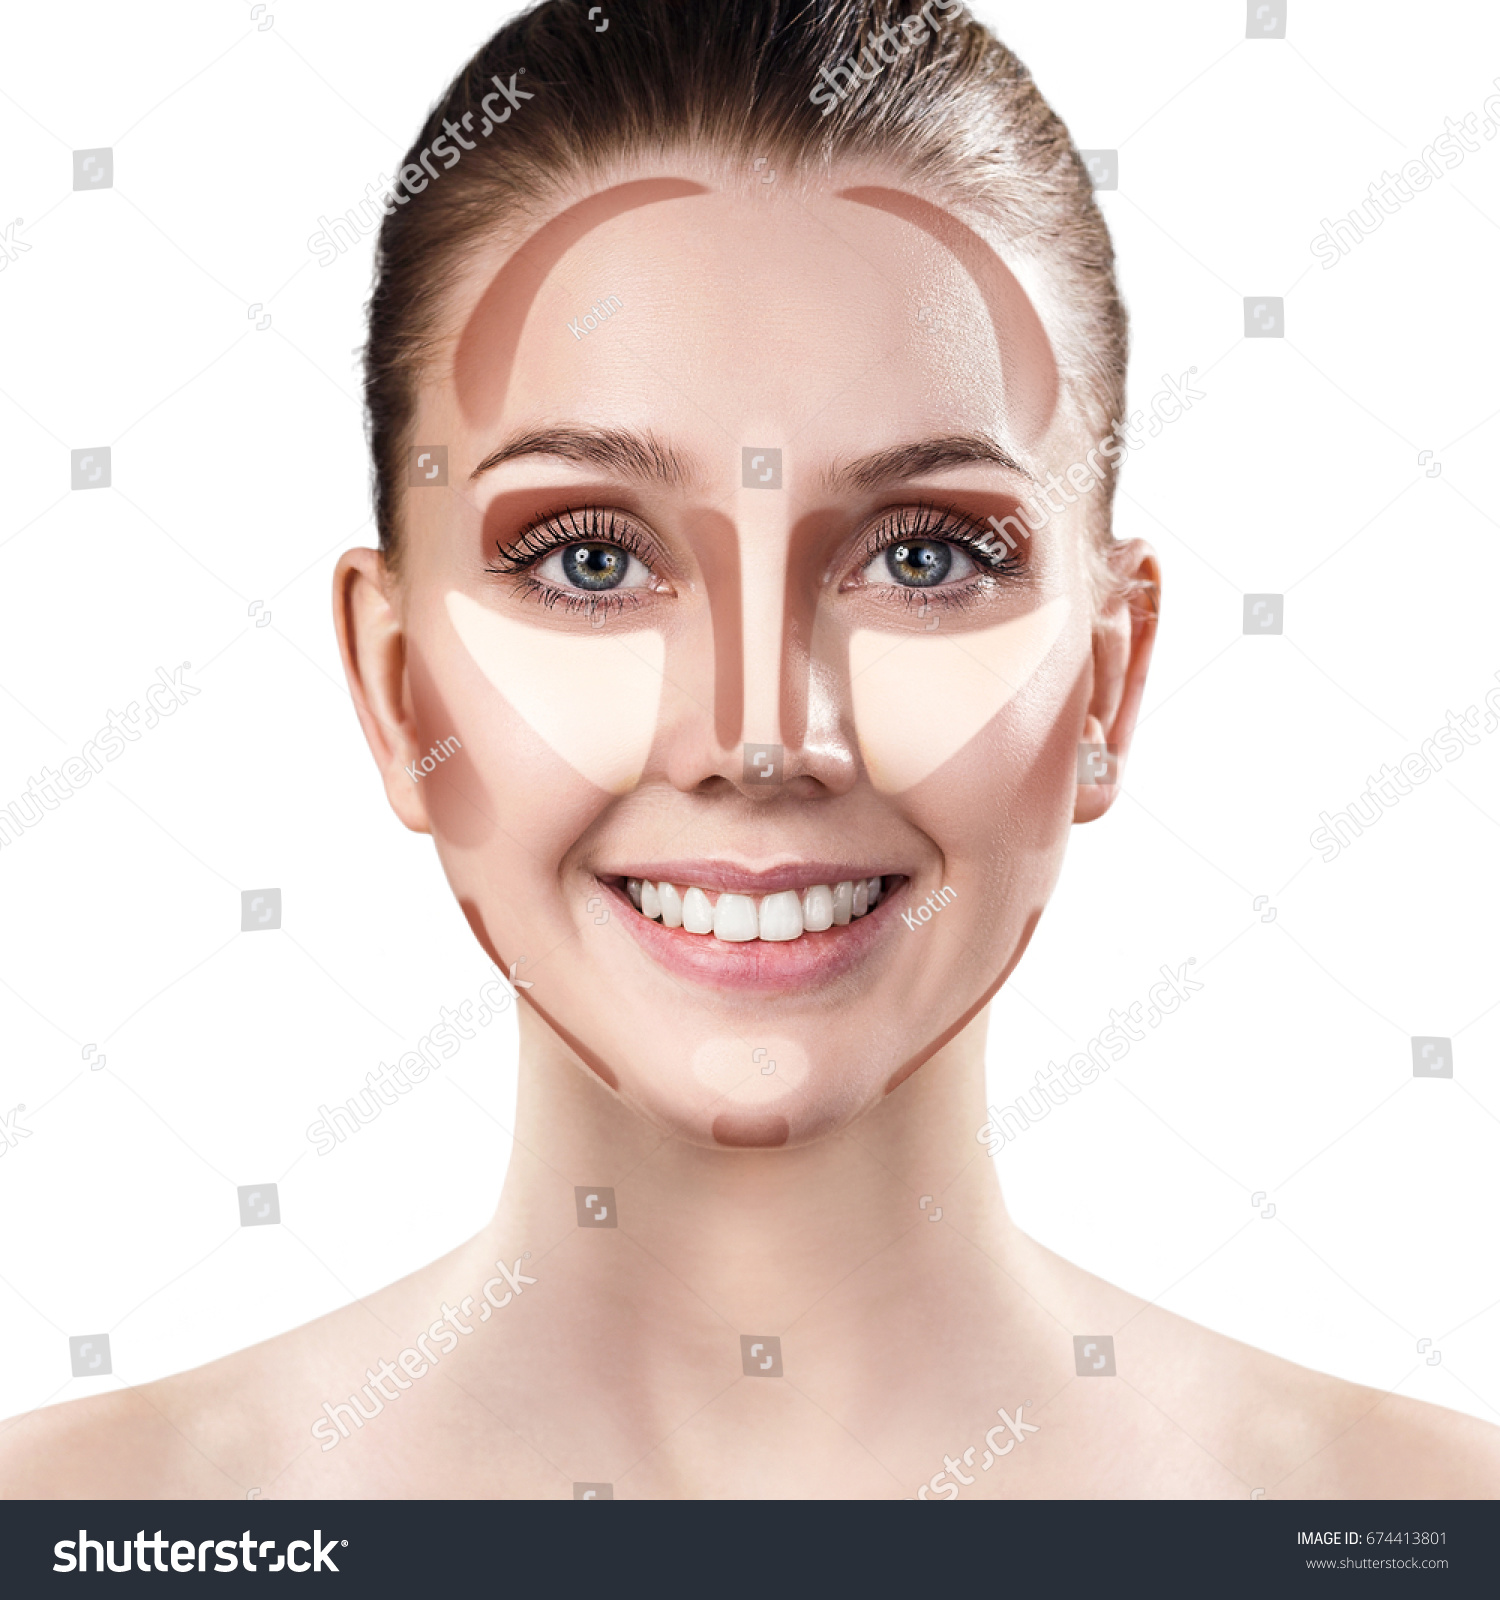 Young woman with sample contouring and highlight makeup on face. #674413801